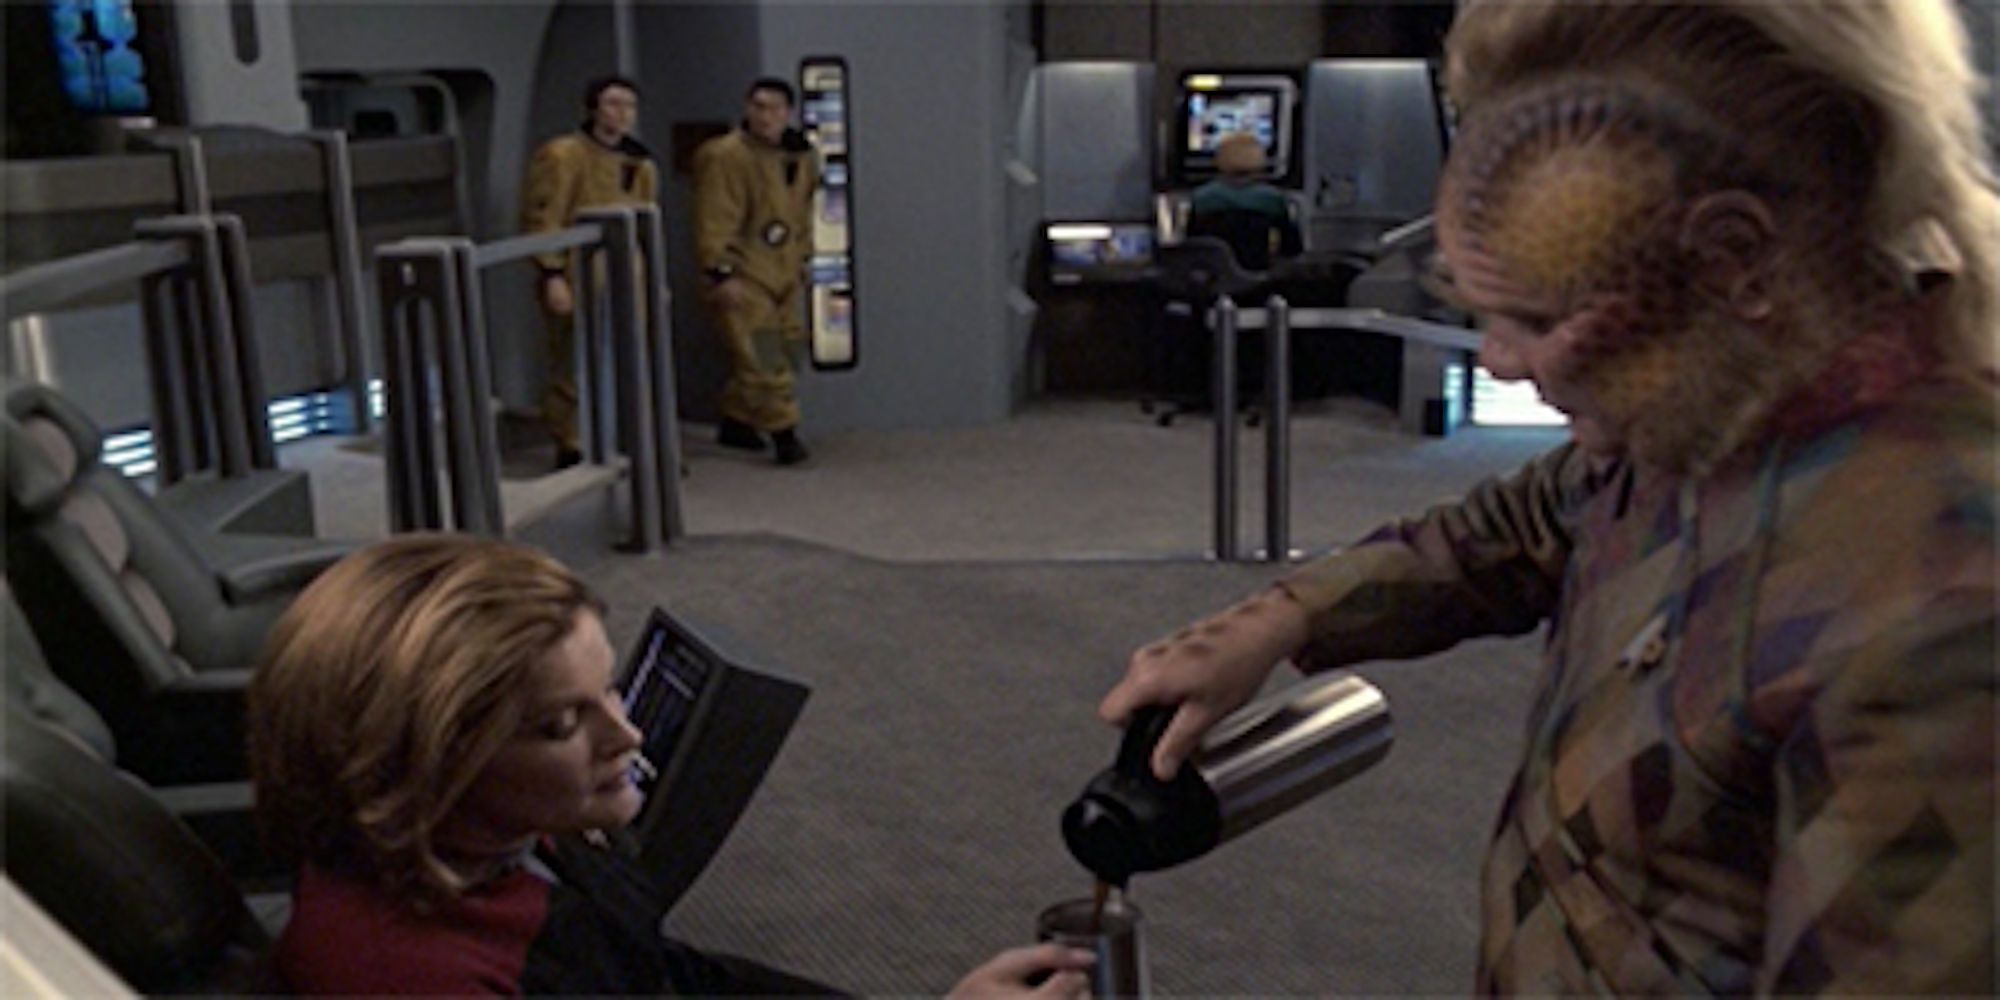 Members of a time dilated species board Voyager